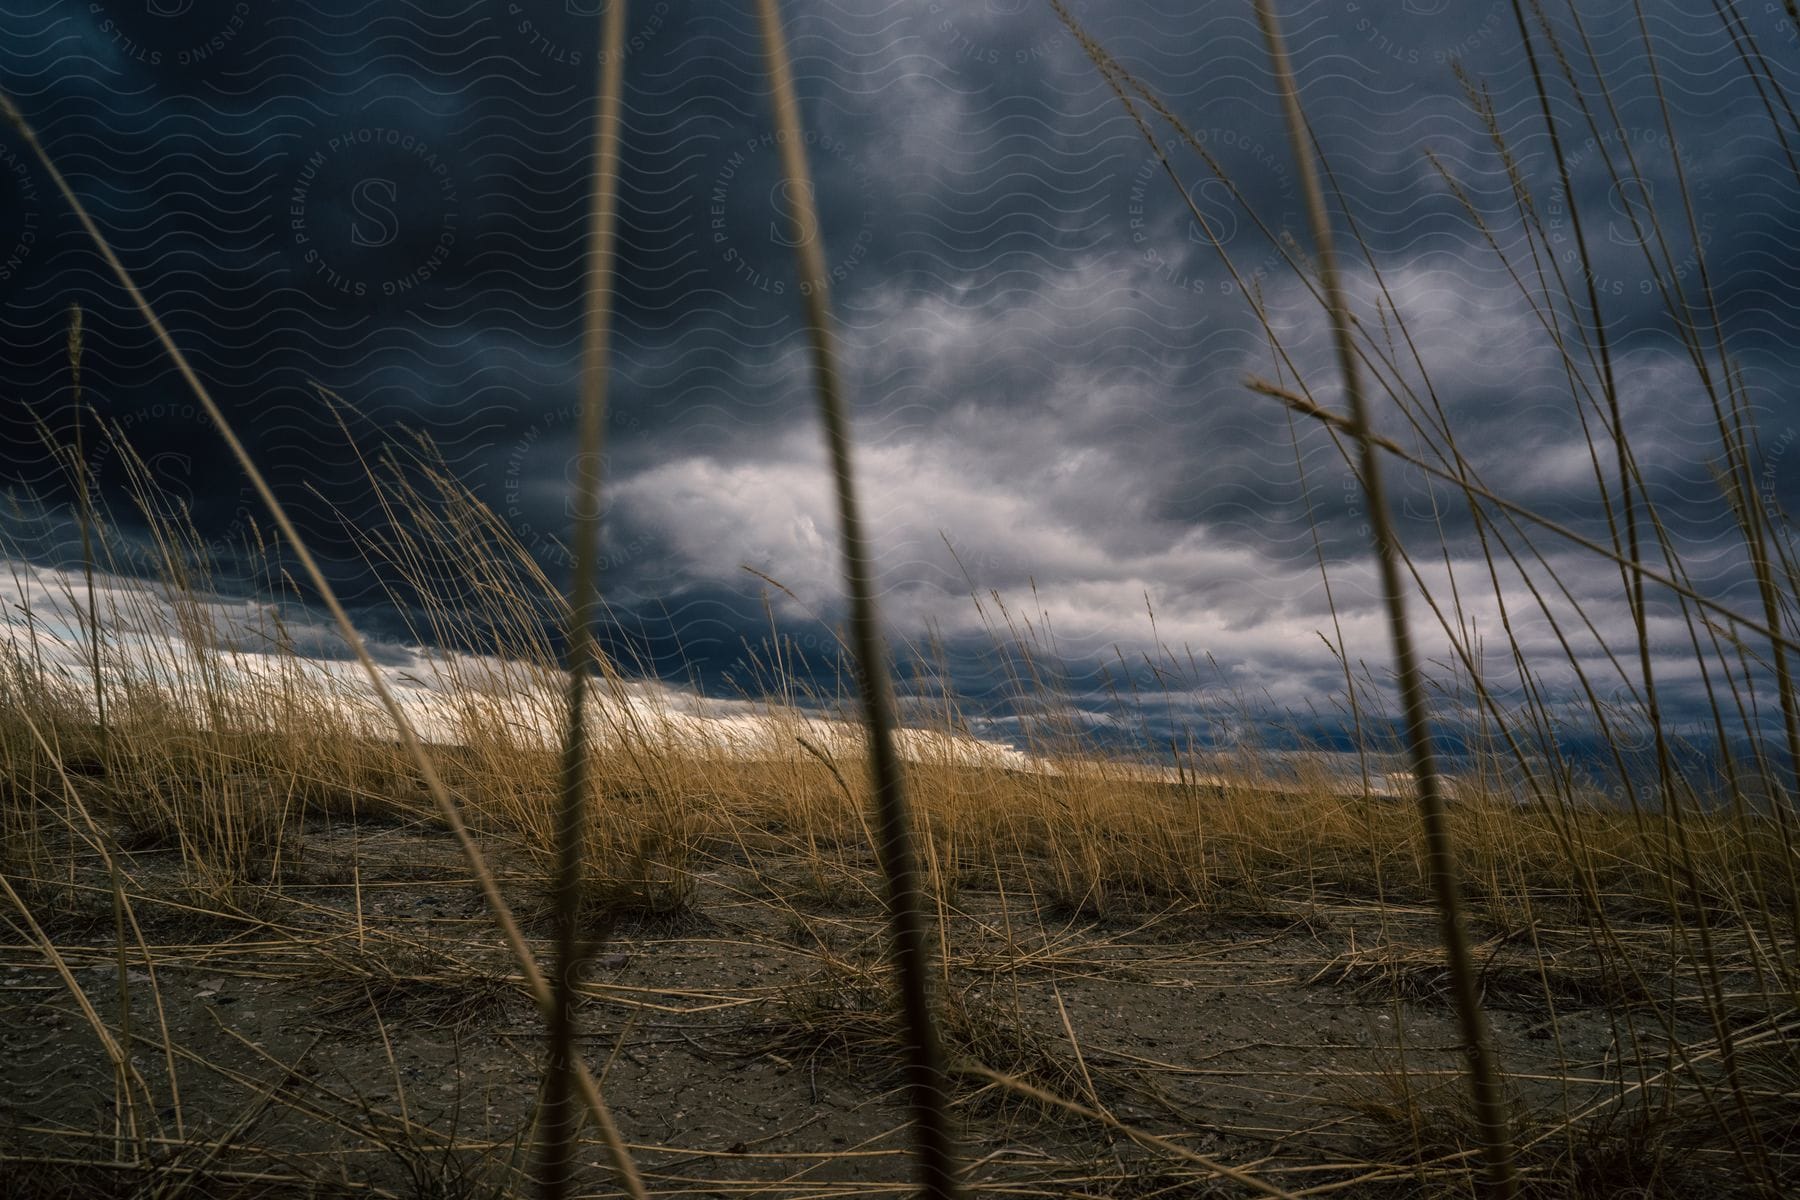 A storm in a grassland field at dusk